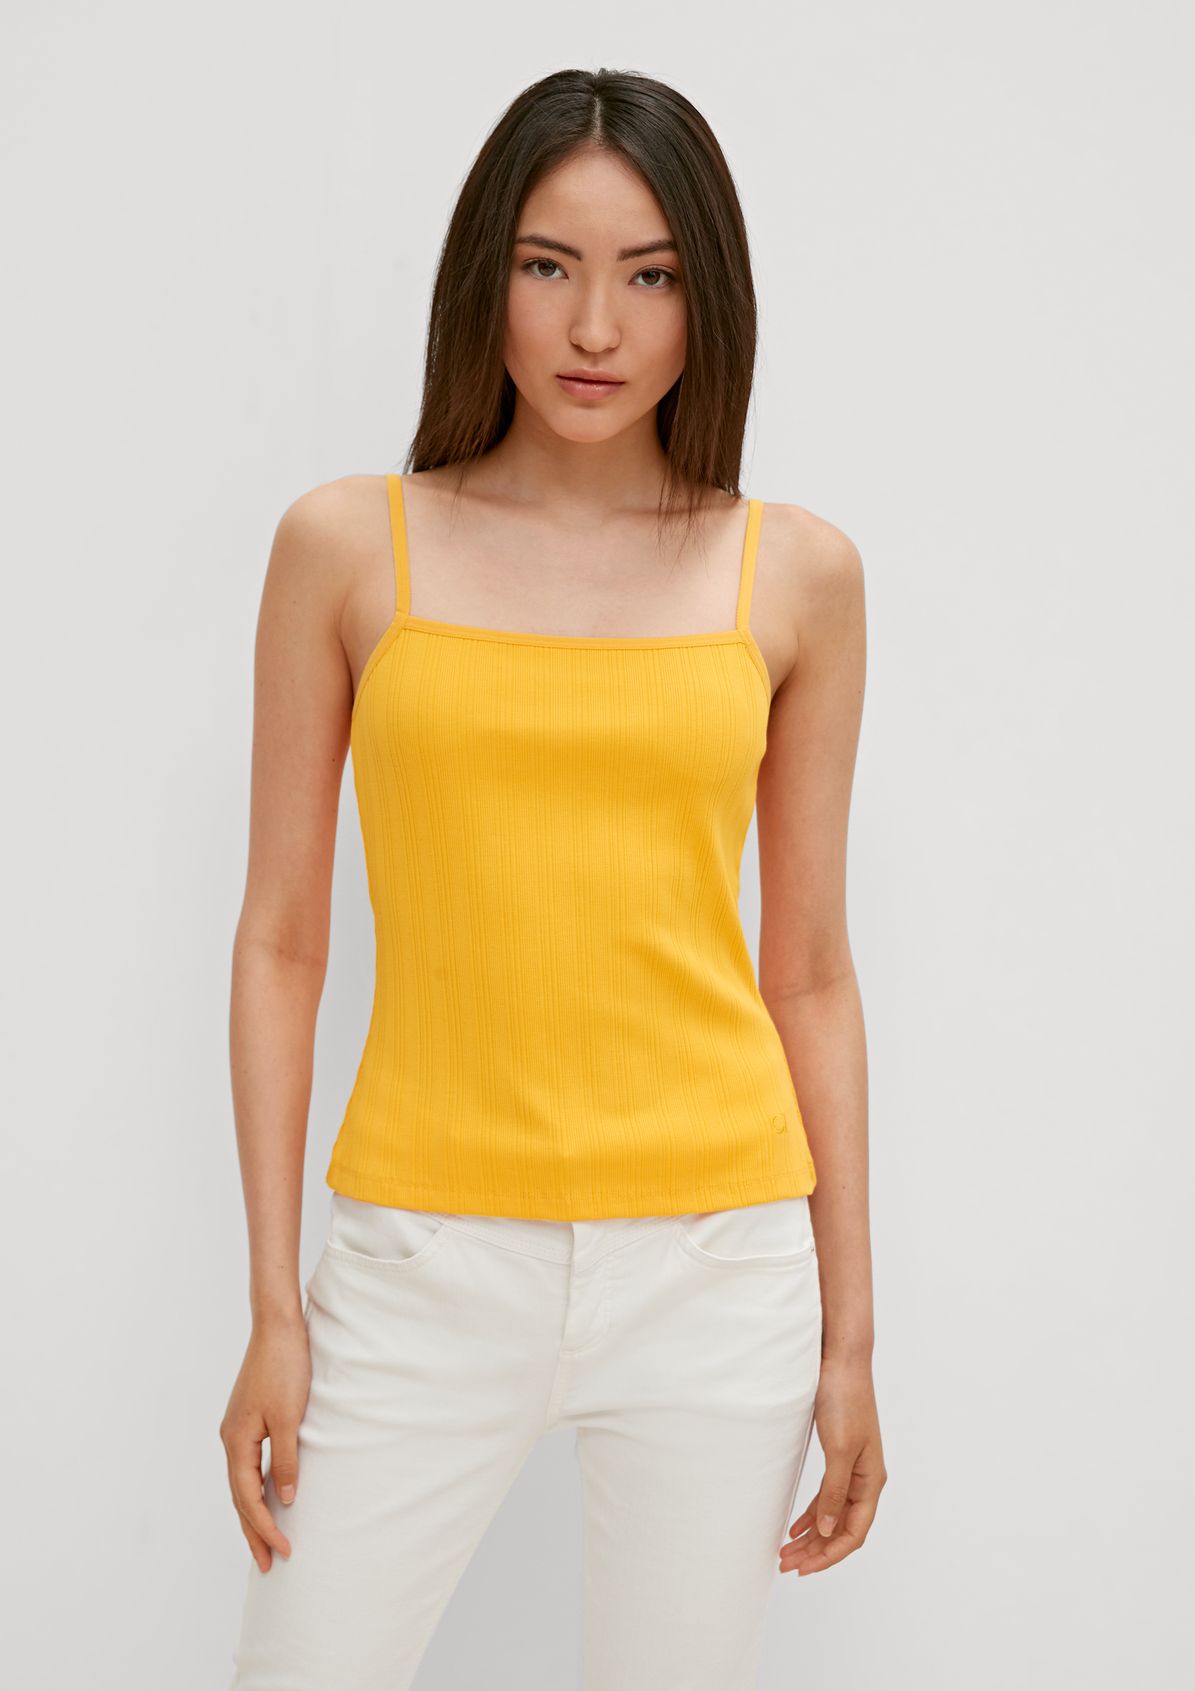 Top with a rib knit pattern from comma